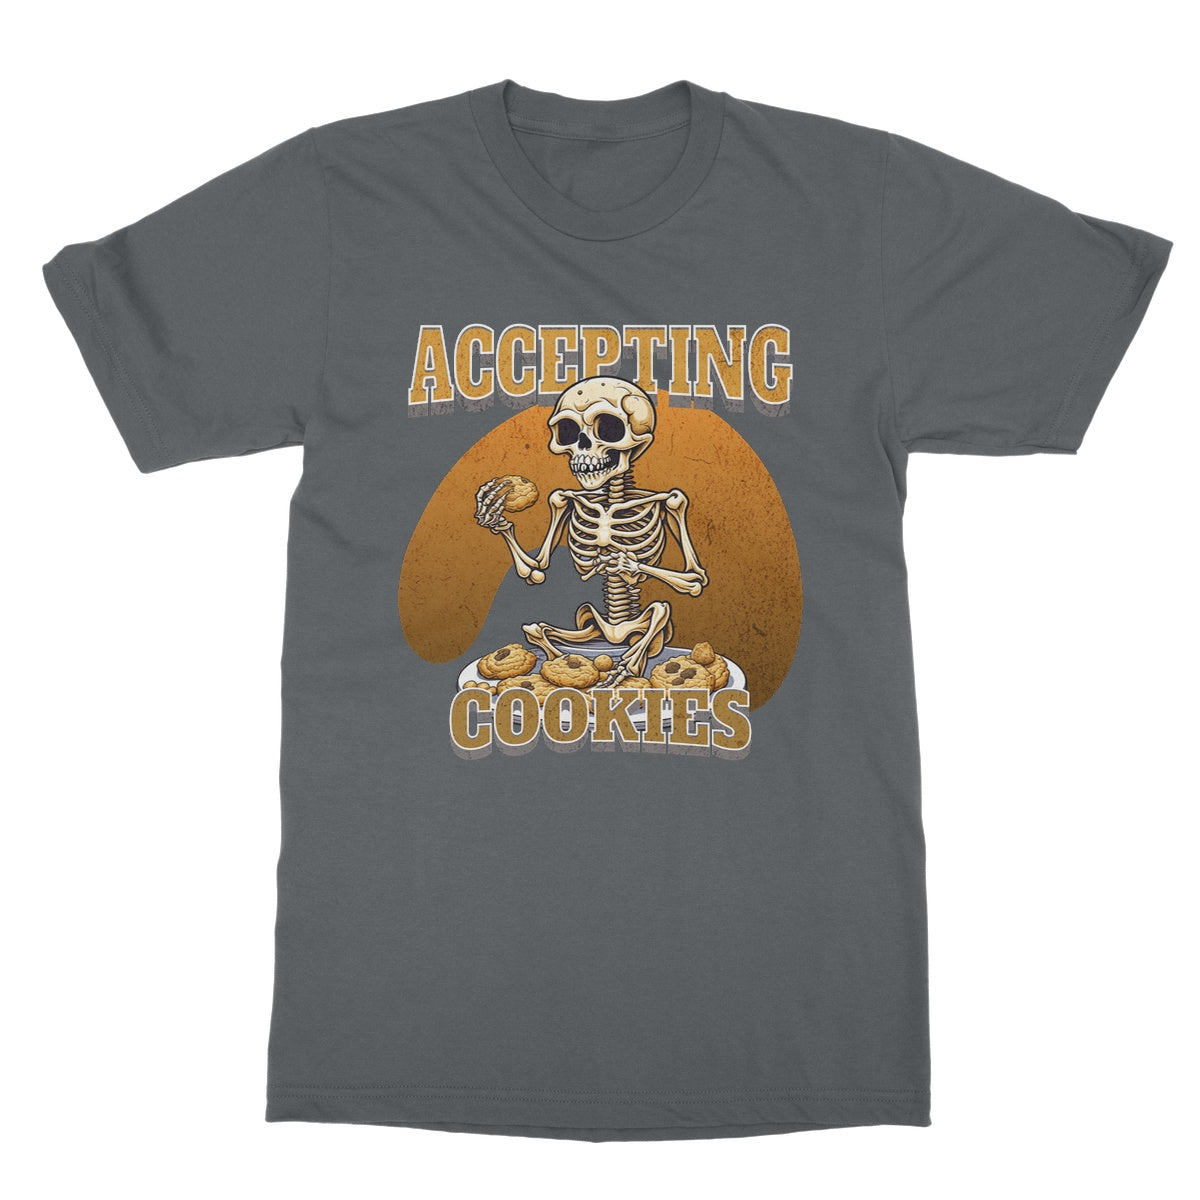 accepting cookies t shirt grey